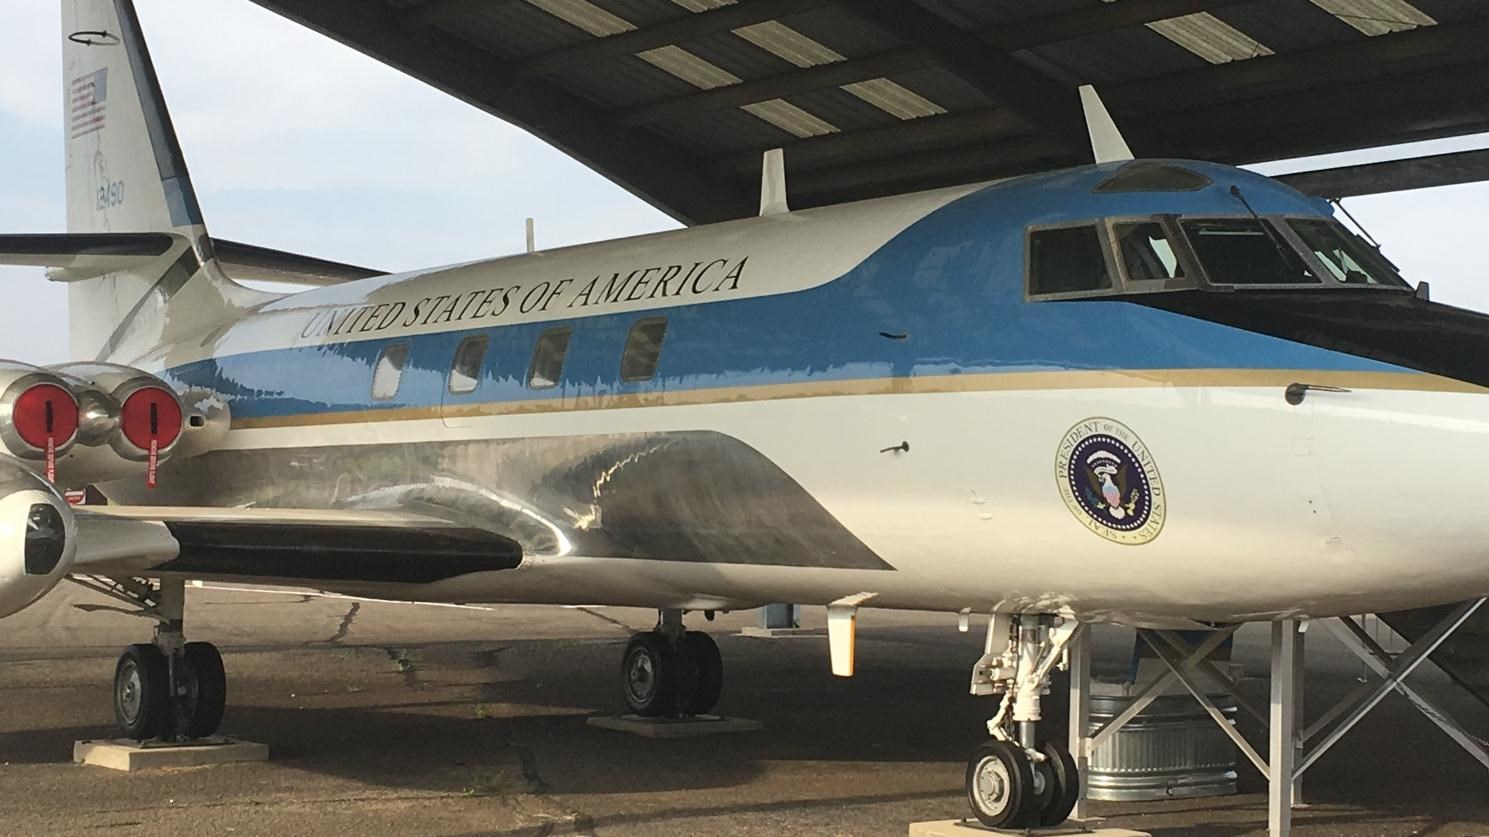 A small presidential plane once designated Air Force One sits under a protective shelter.